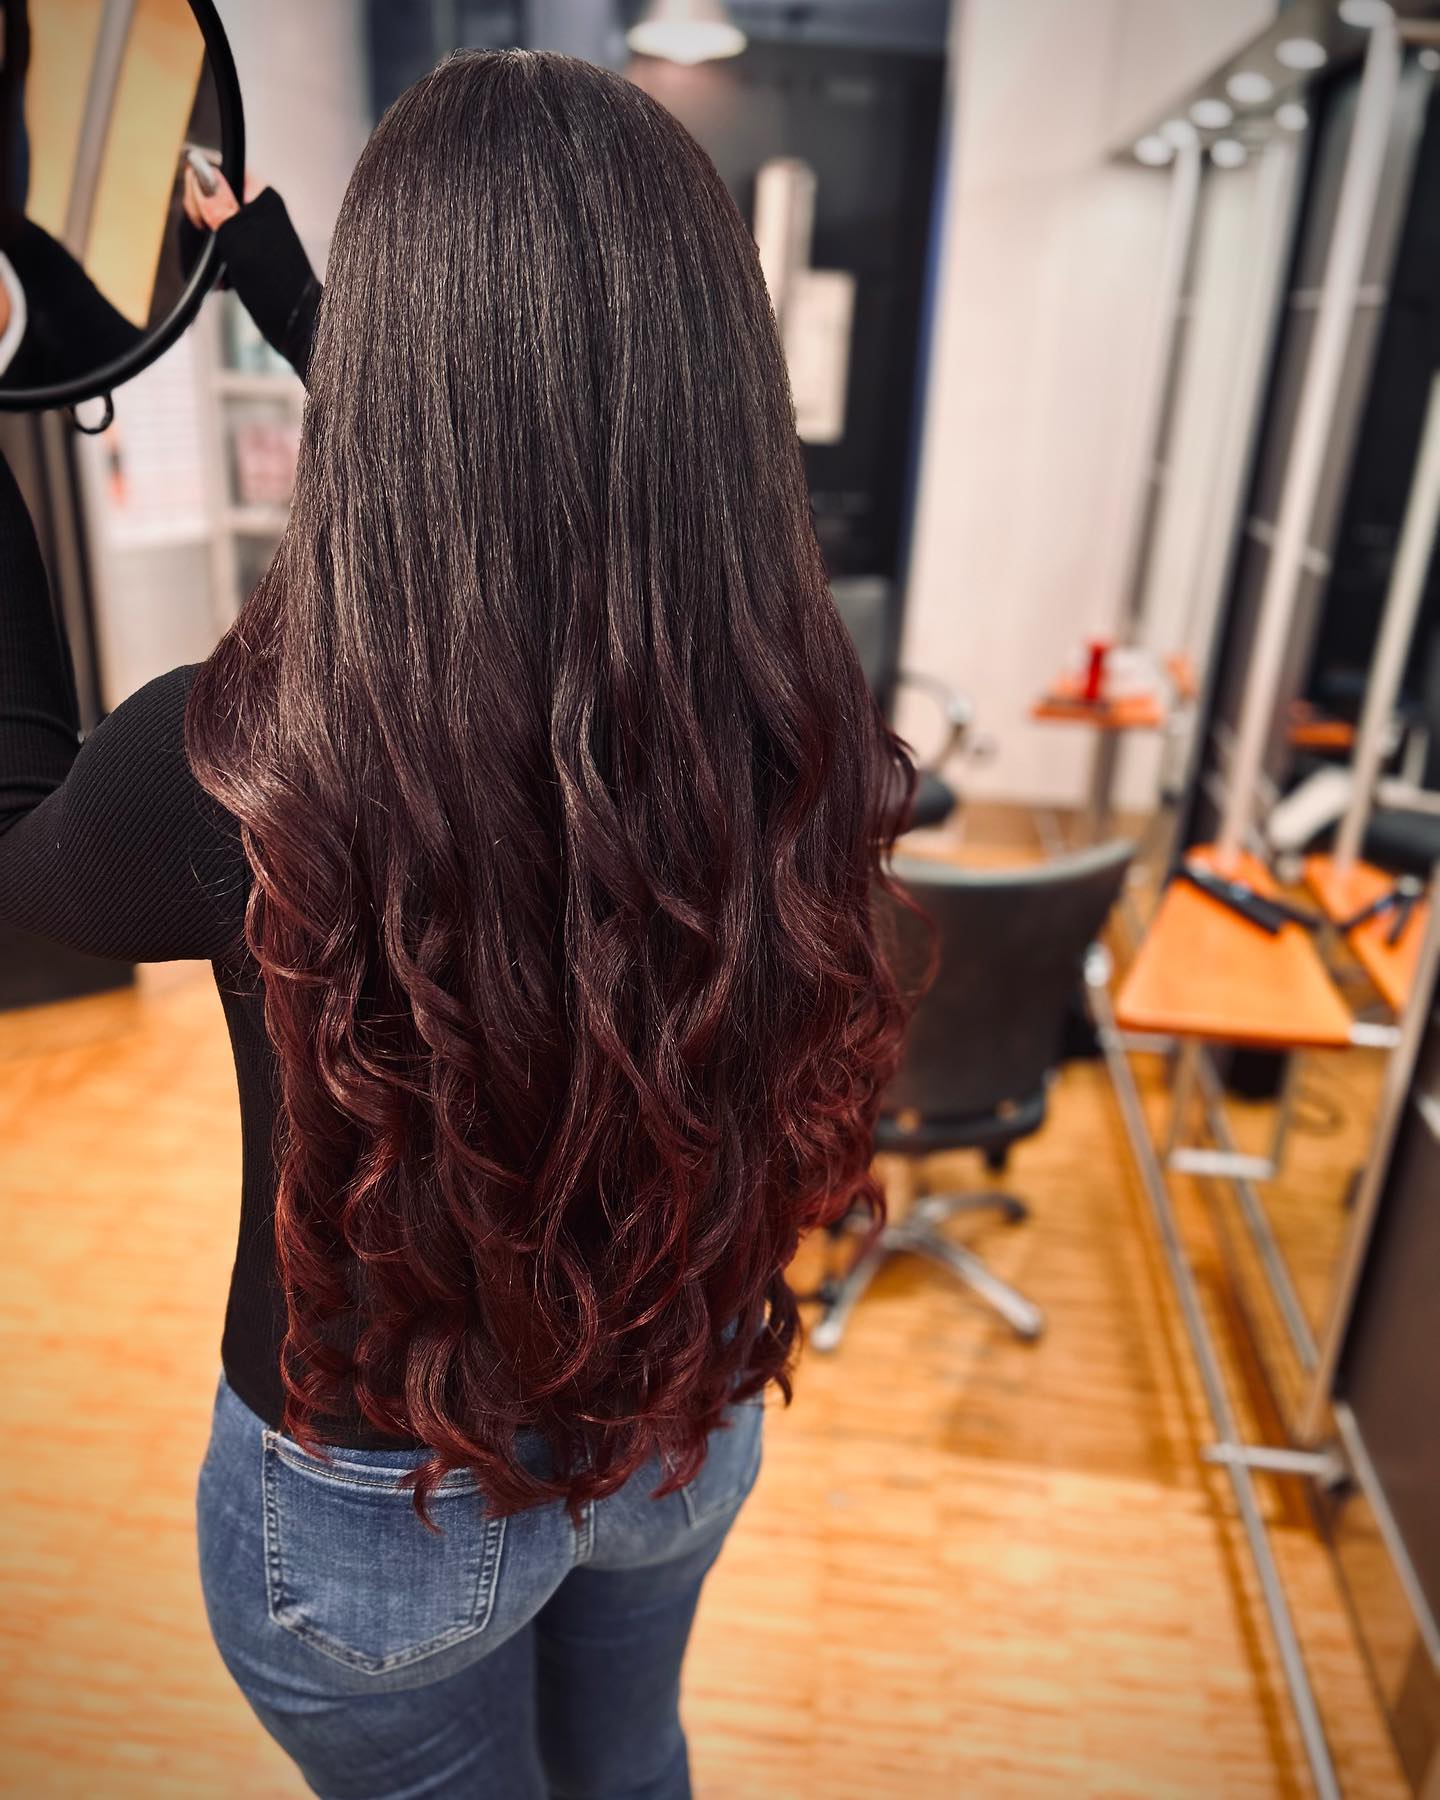 red ombre hair style 73 Natural red ombre hair | Red ombre background | Red ombre hair Red Ombre Hairstyles